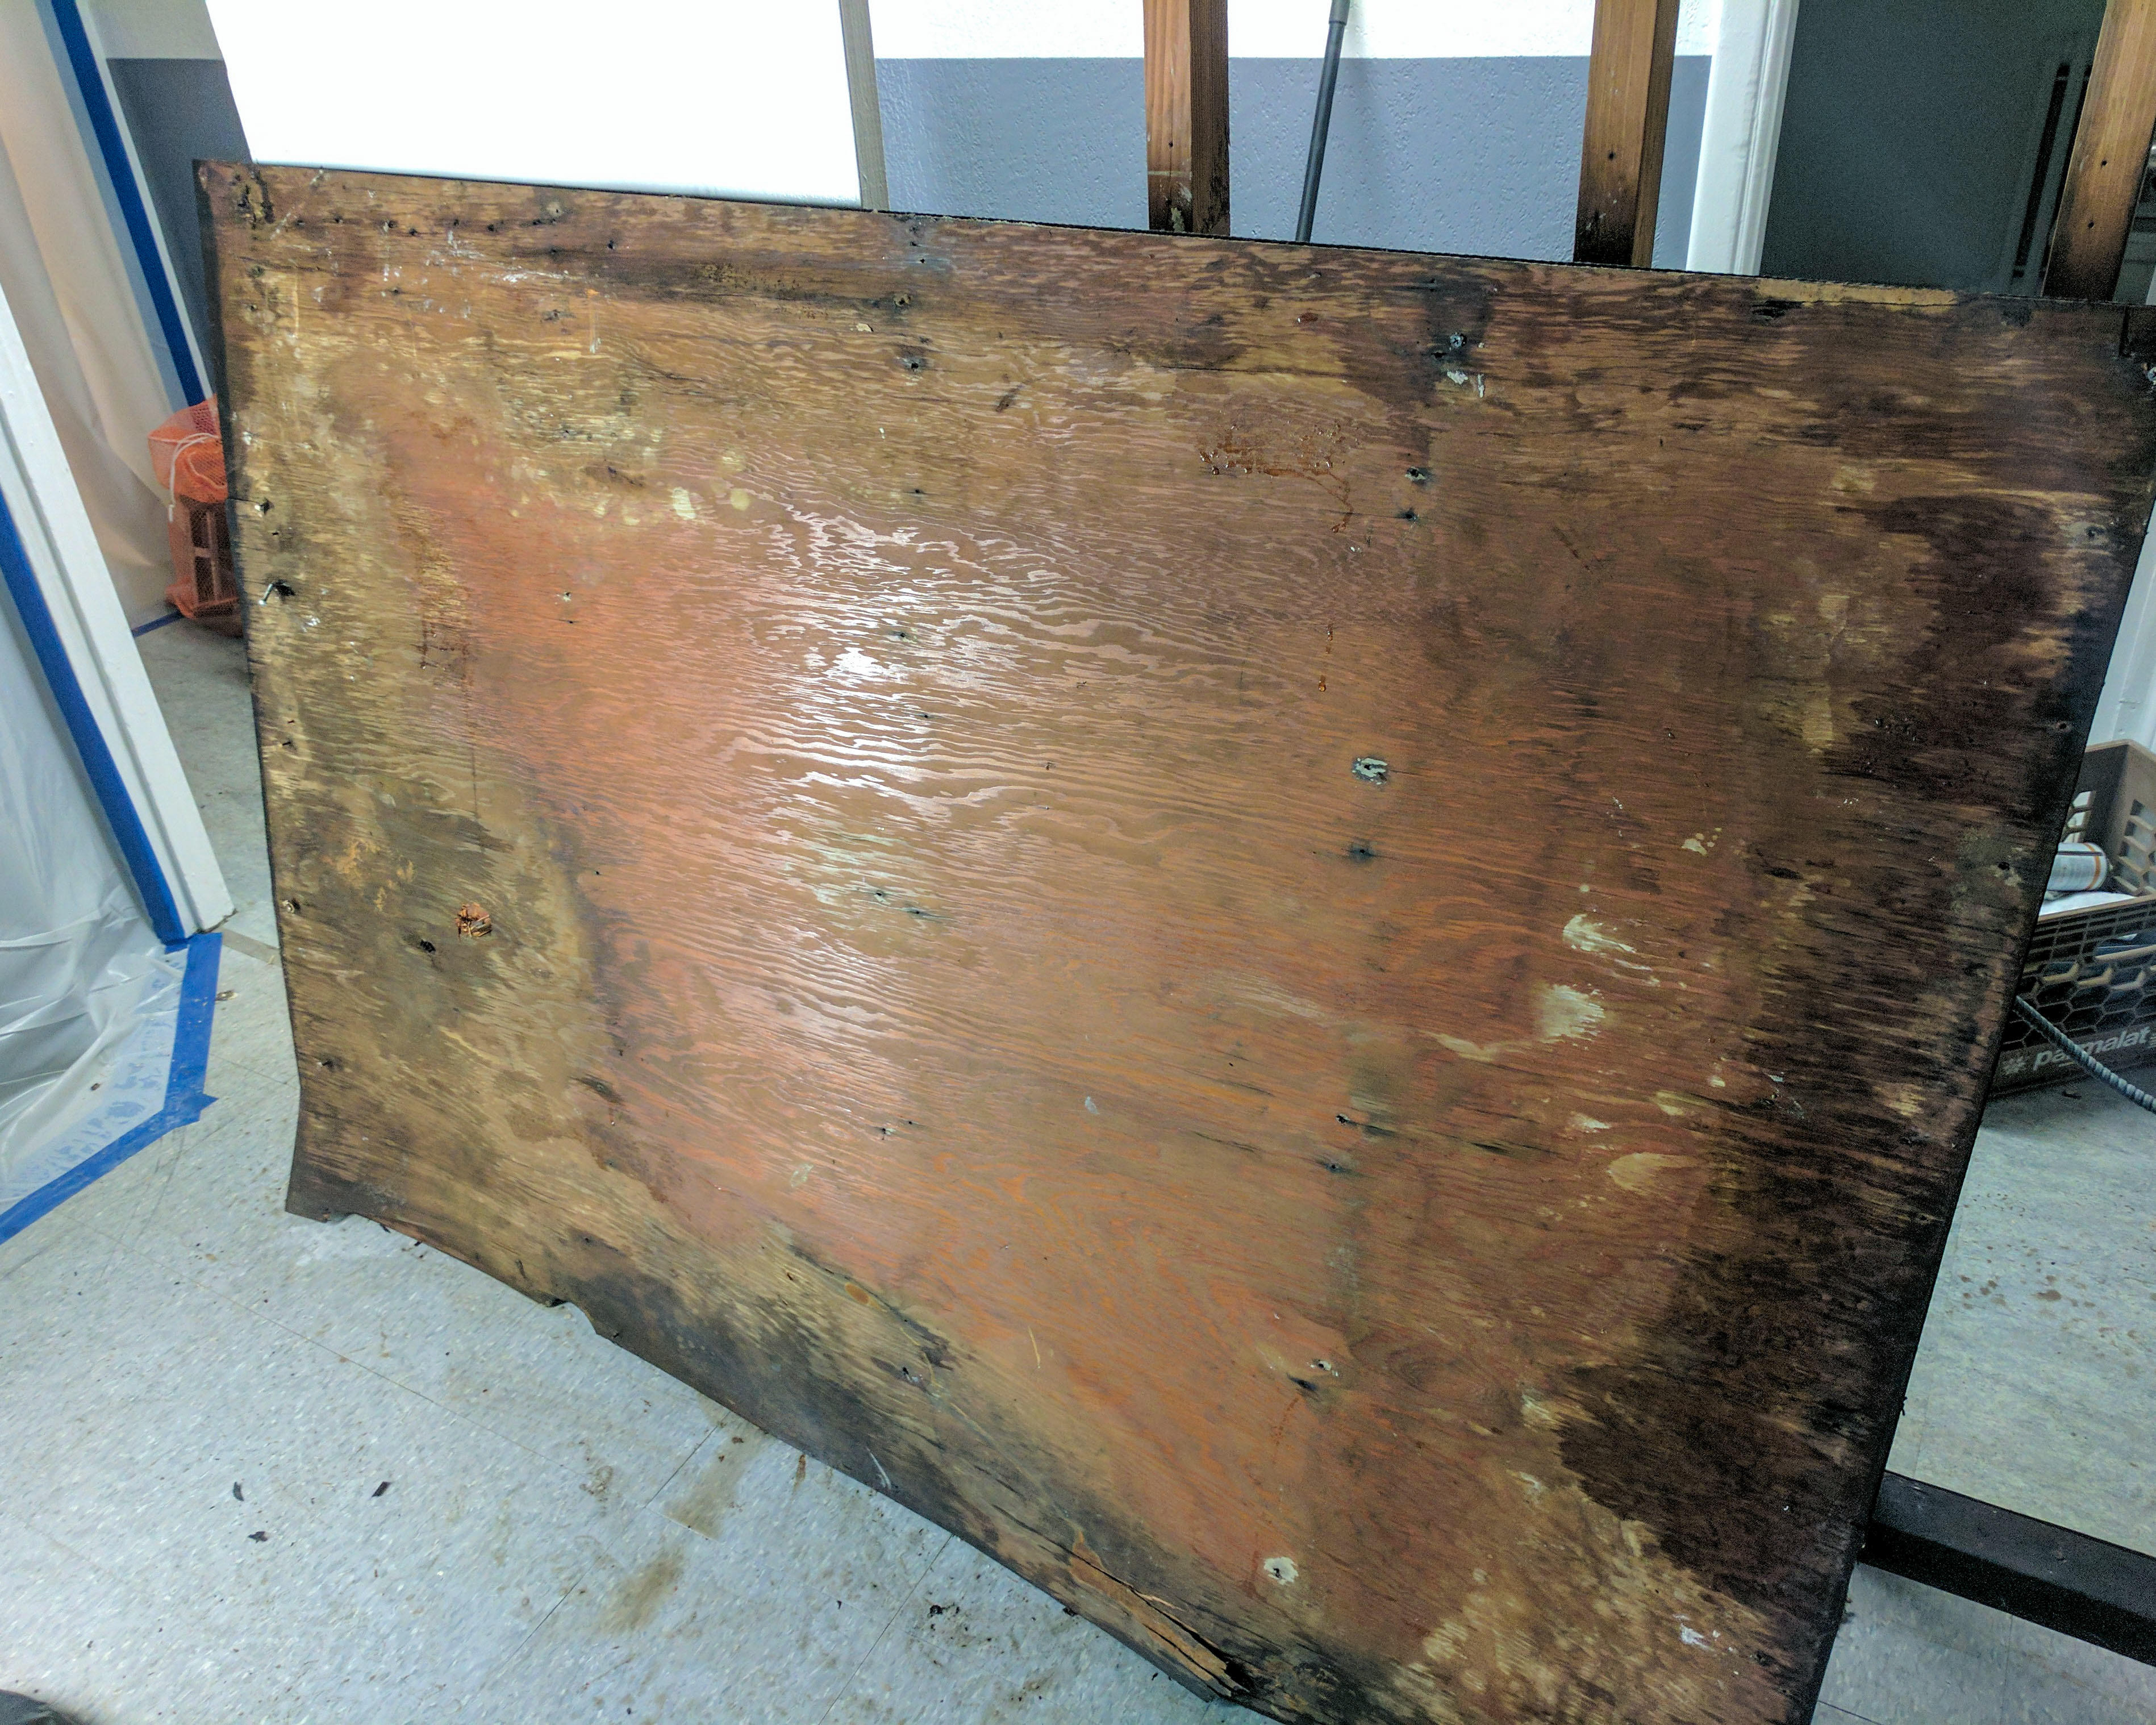 It's possible to discover mold in unexpected places after water damage. Mold will grow and spread if you ignore it. Rely on SERVPRO of Montclair/ West Orange for all of your mold damage cleanup and remediation needs in Upper Montclair, NJ. Give us a call!